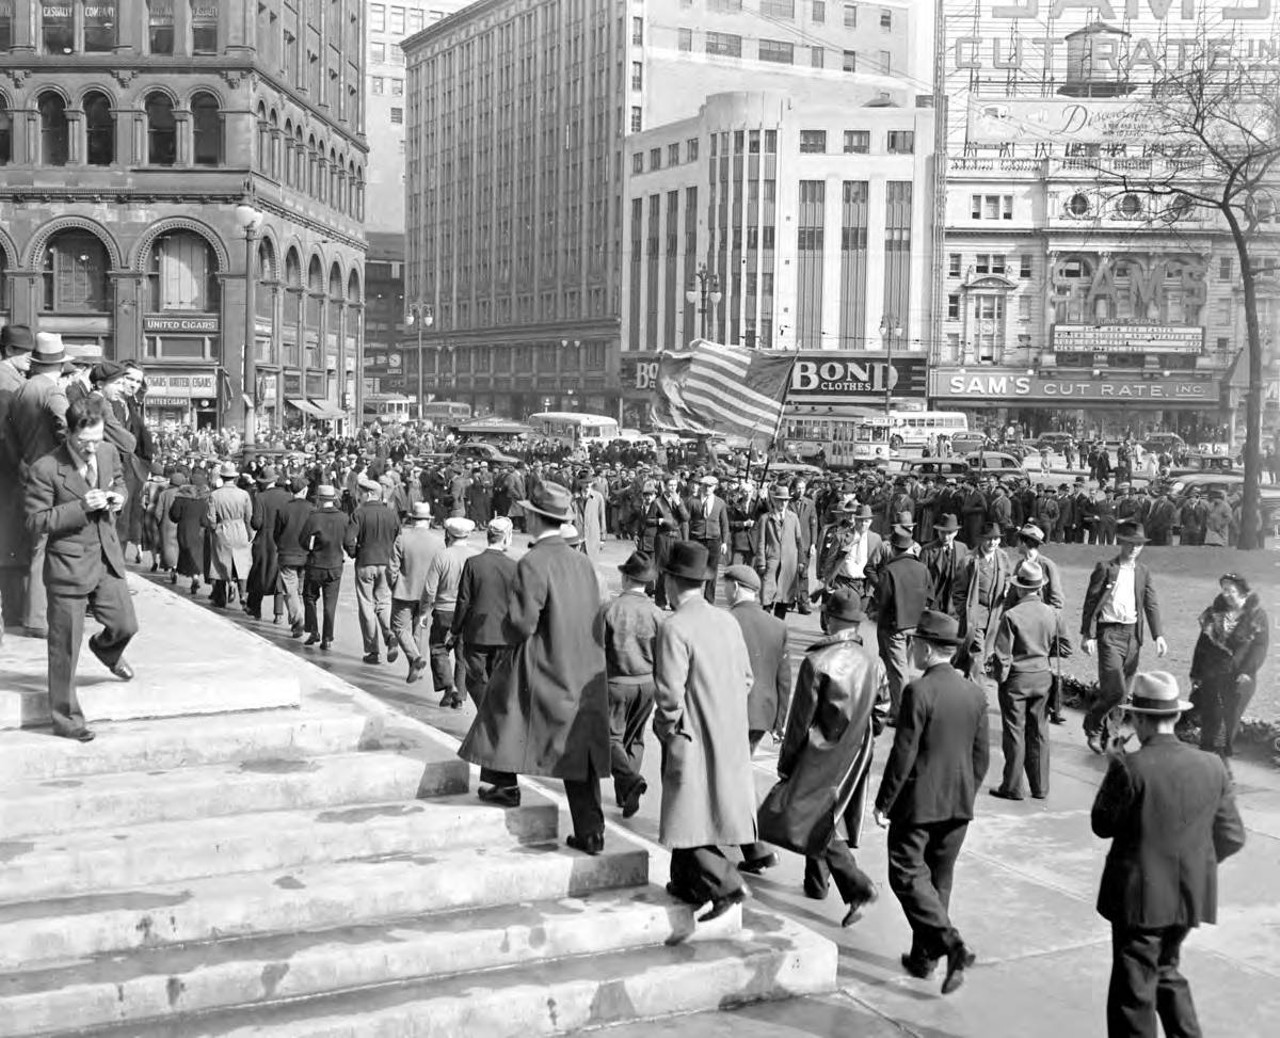 
March 31, 1938: People march at the UAW picket line near Detroit's City Hall.